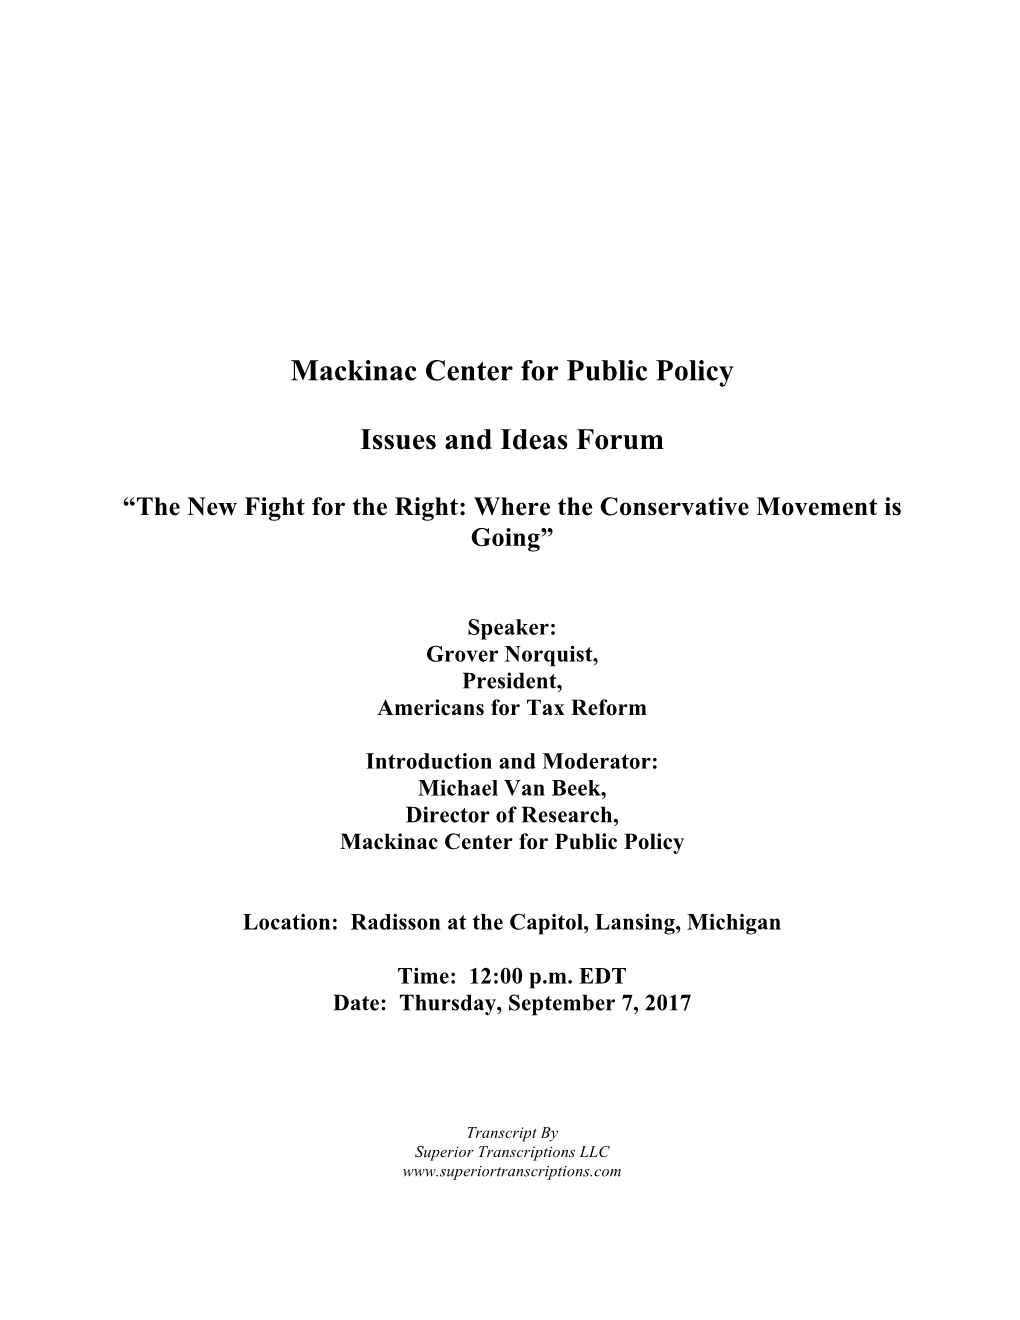 Mackinac Center for Public Policy Issues and Ideas Forum